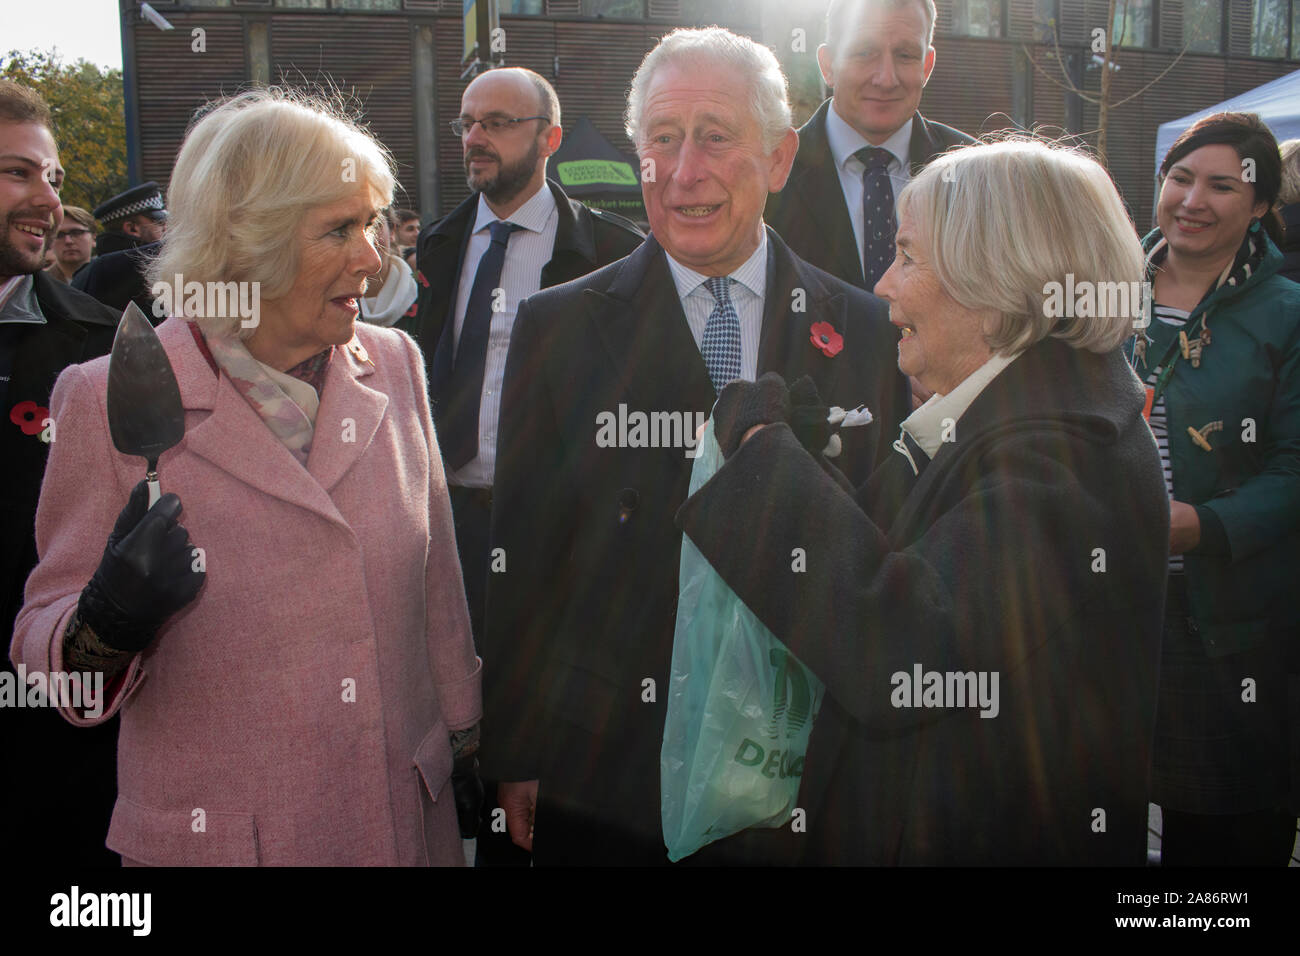 Prince Charles and Camilla the Duchess of Cornwall at the Swiss Cottage farmers market, meeting stall holders. Charles relaxed and laughing, Camilla with a cake cutter. Bodyguards are standing behind them. Its is the 20th anniversary of London Farmers Market. UK 2019. 2010s HOMER SYKES Stock Photo